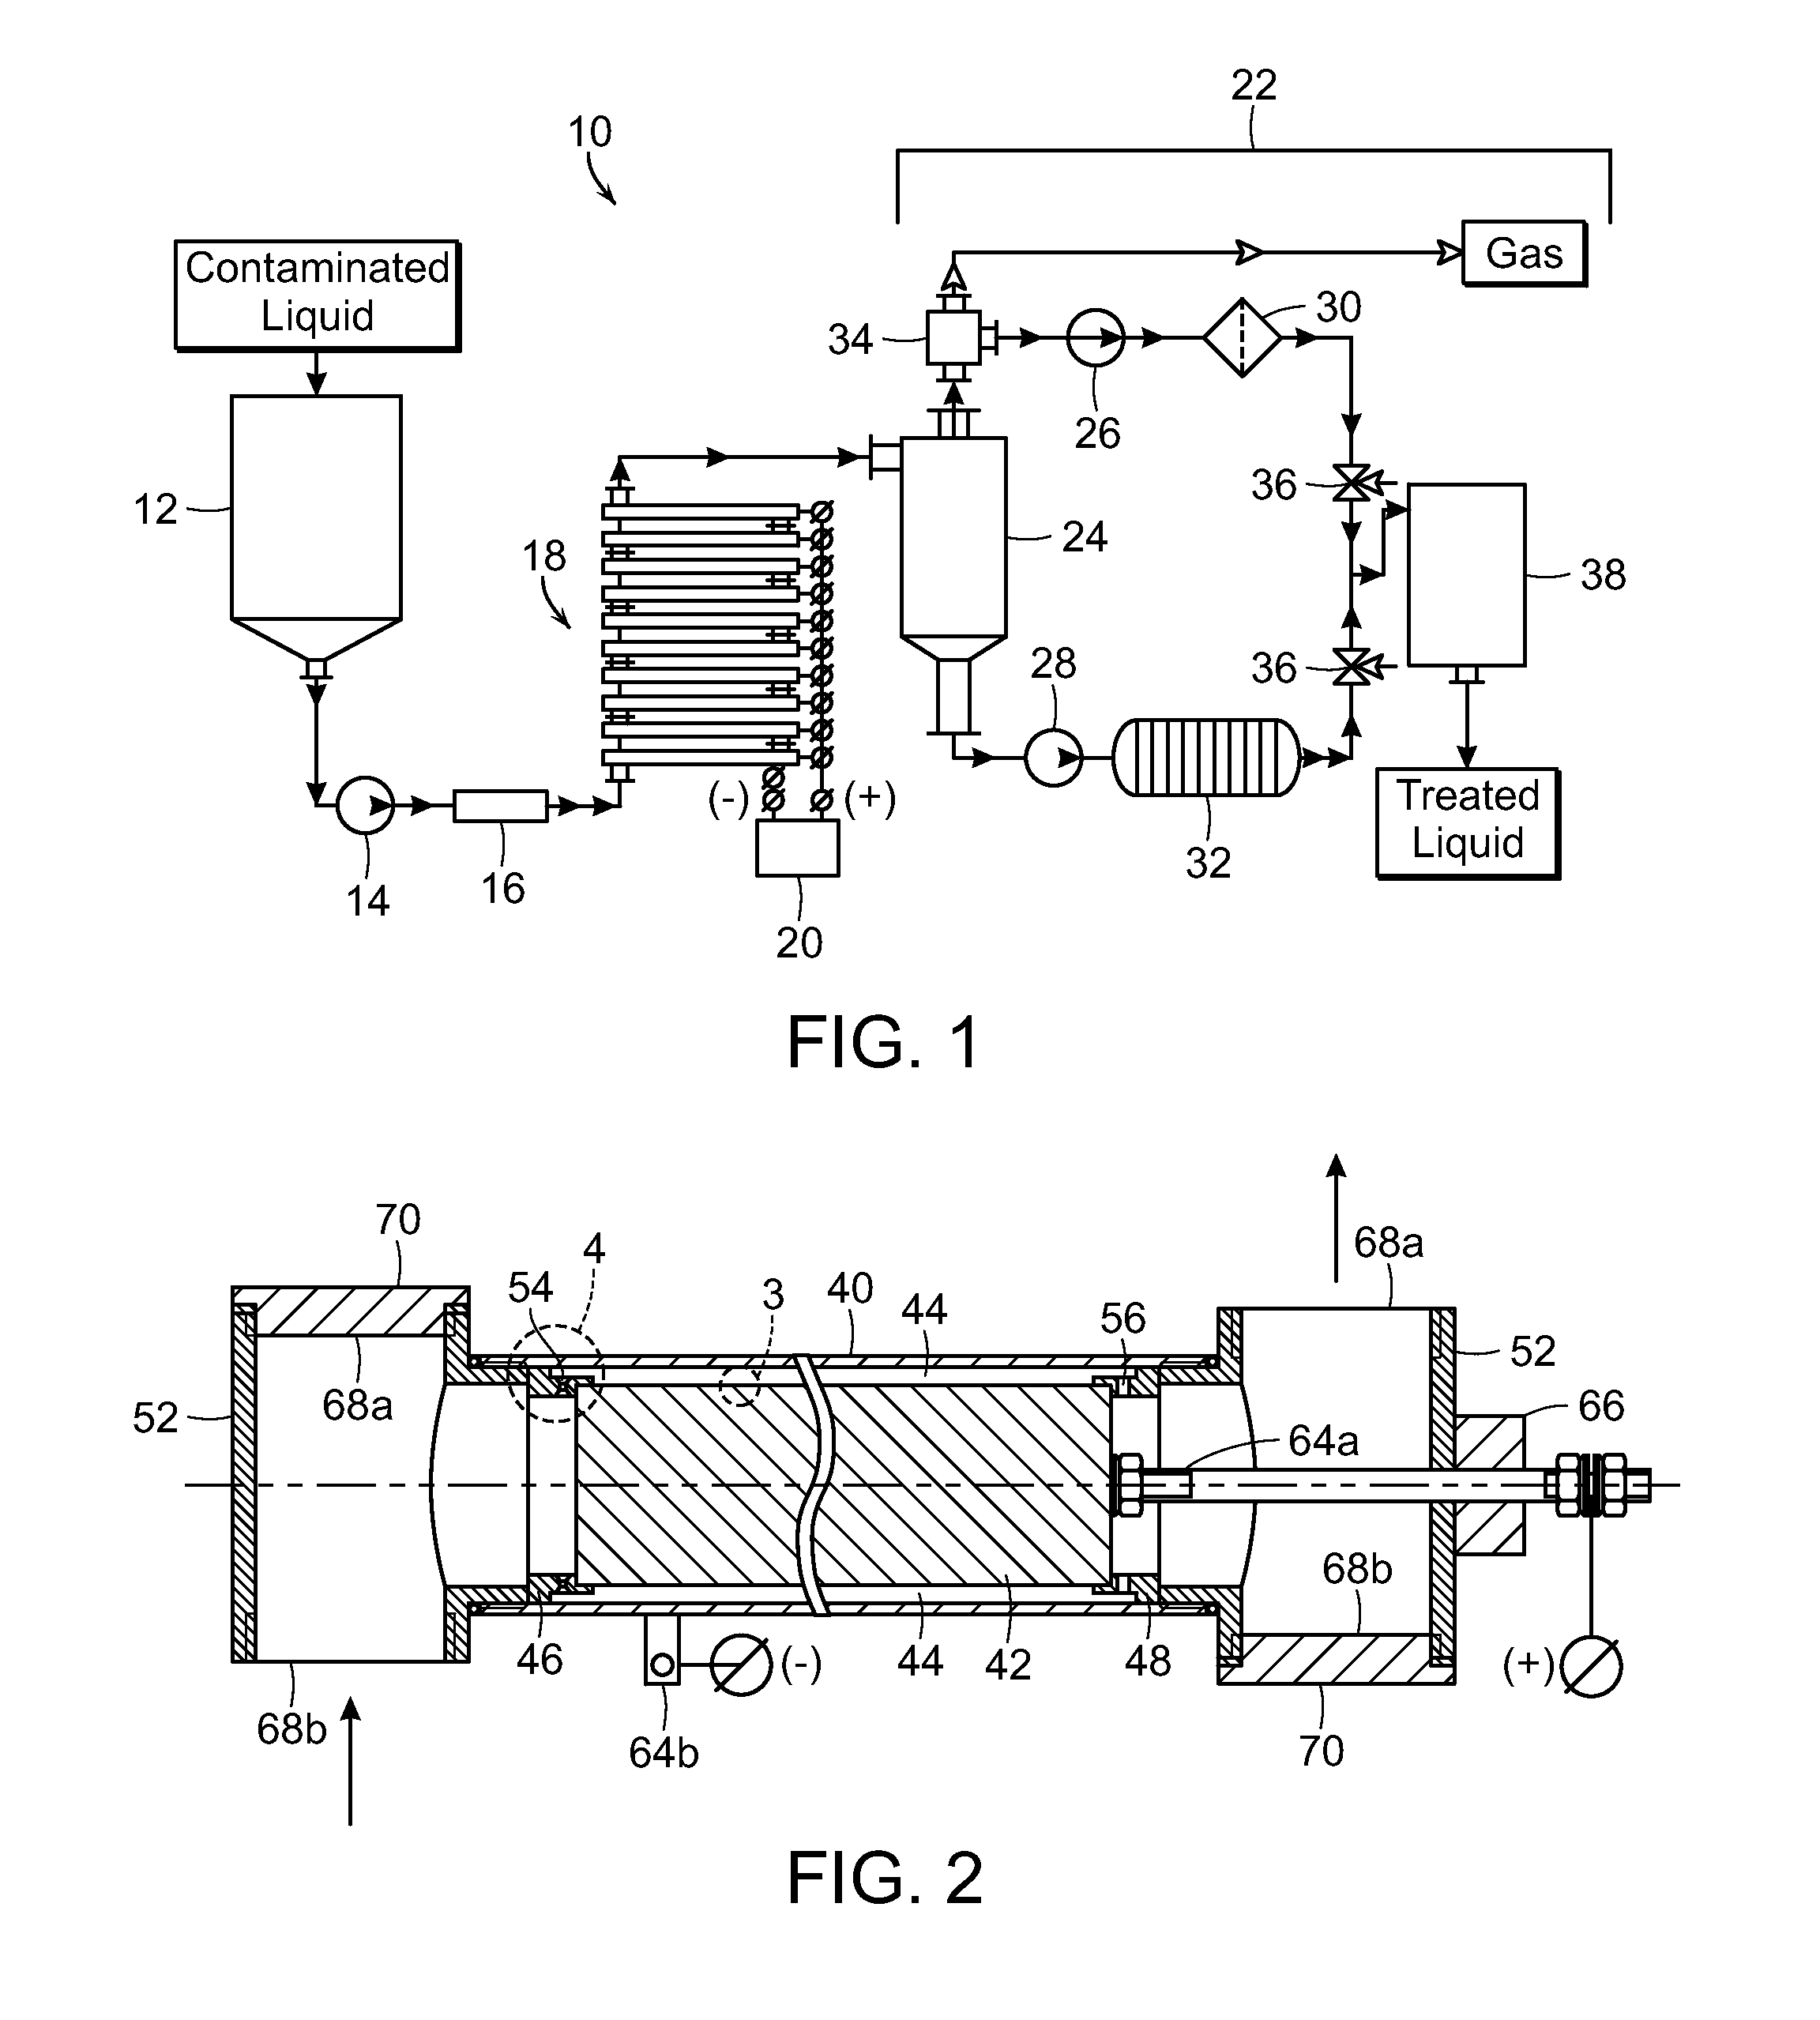 Air flotation and electrocoagulation system